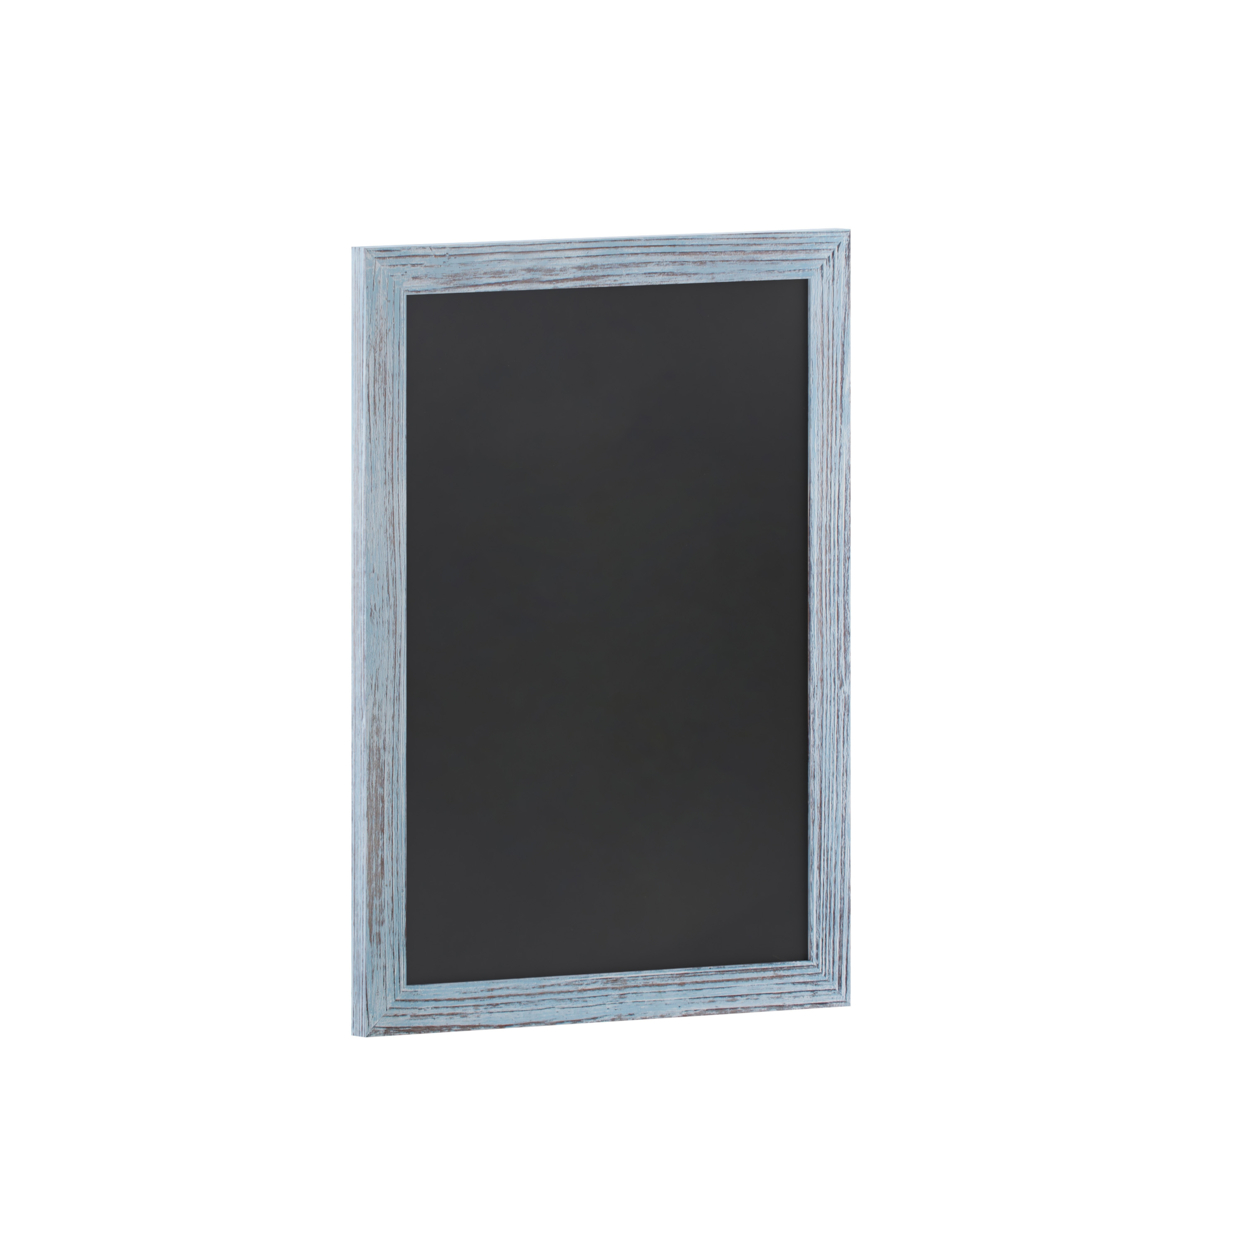 24 Inch Wall Hanging Magnetic Chalkboard, Pine Wood Frame, Rustic Blue